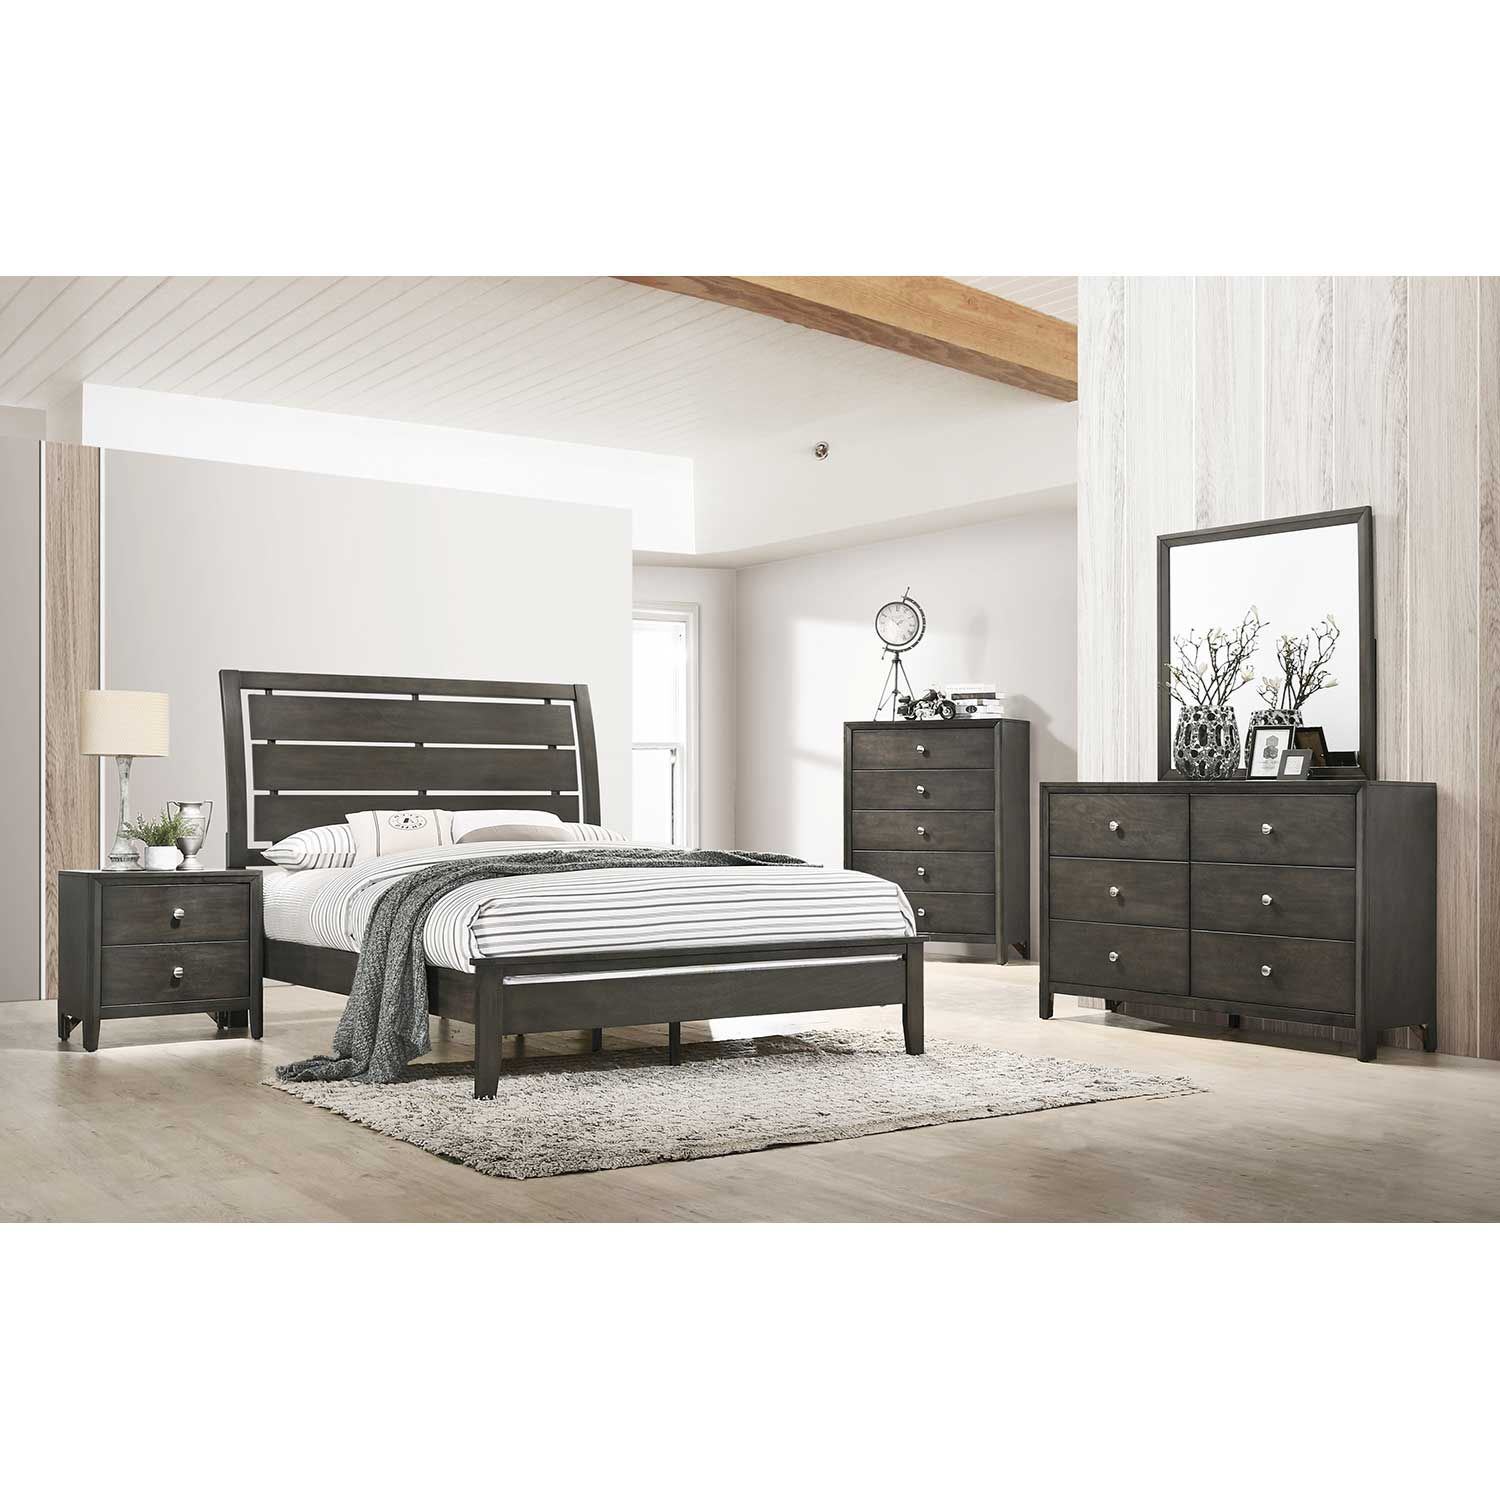 Grant Full Panel Bed | 1060-38 35 | Lifestyle Furniture | AFW.com